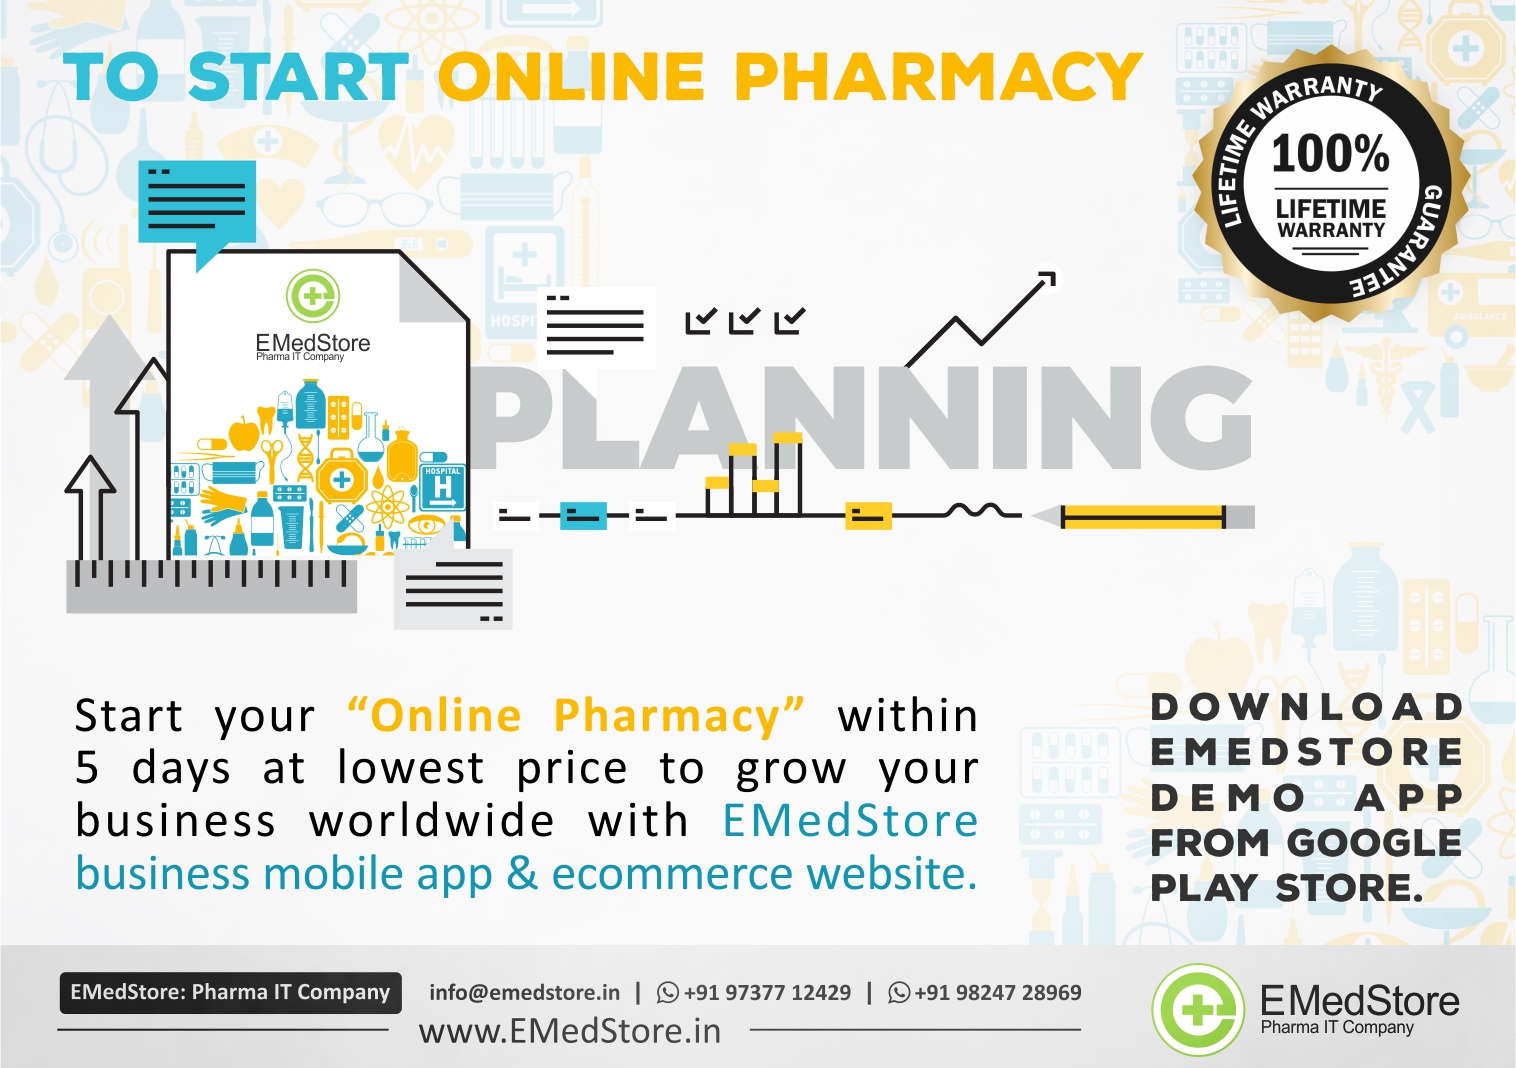 Why EMedStore Is best healthcare Application?